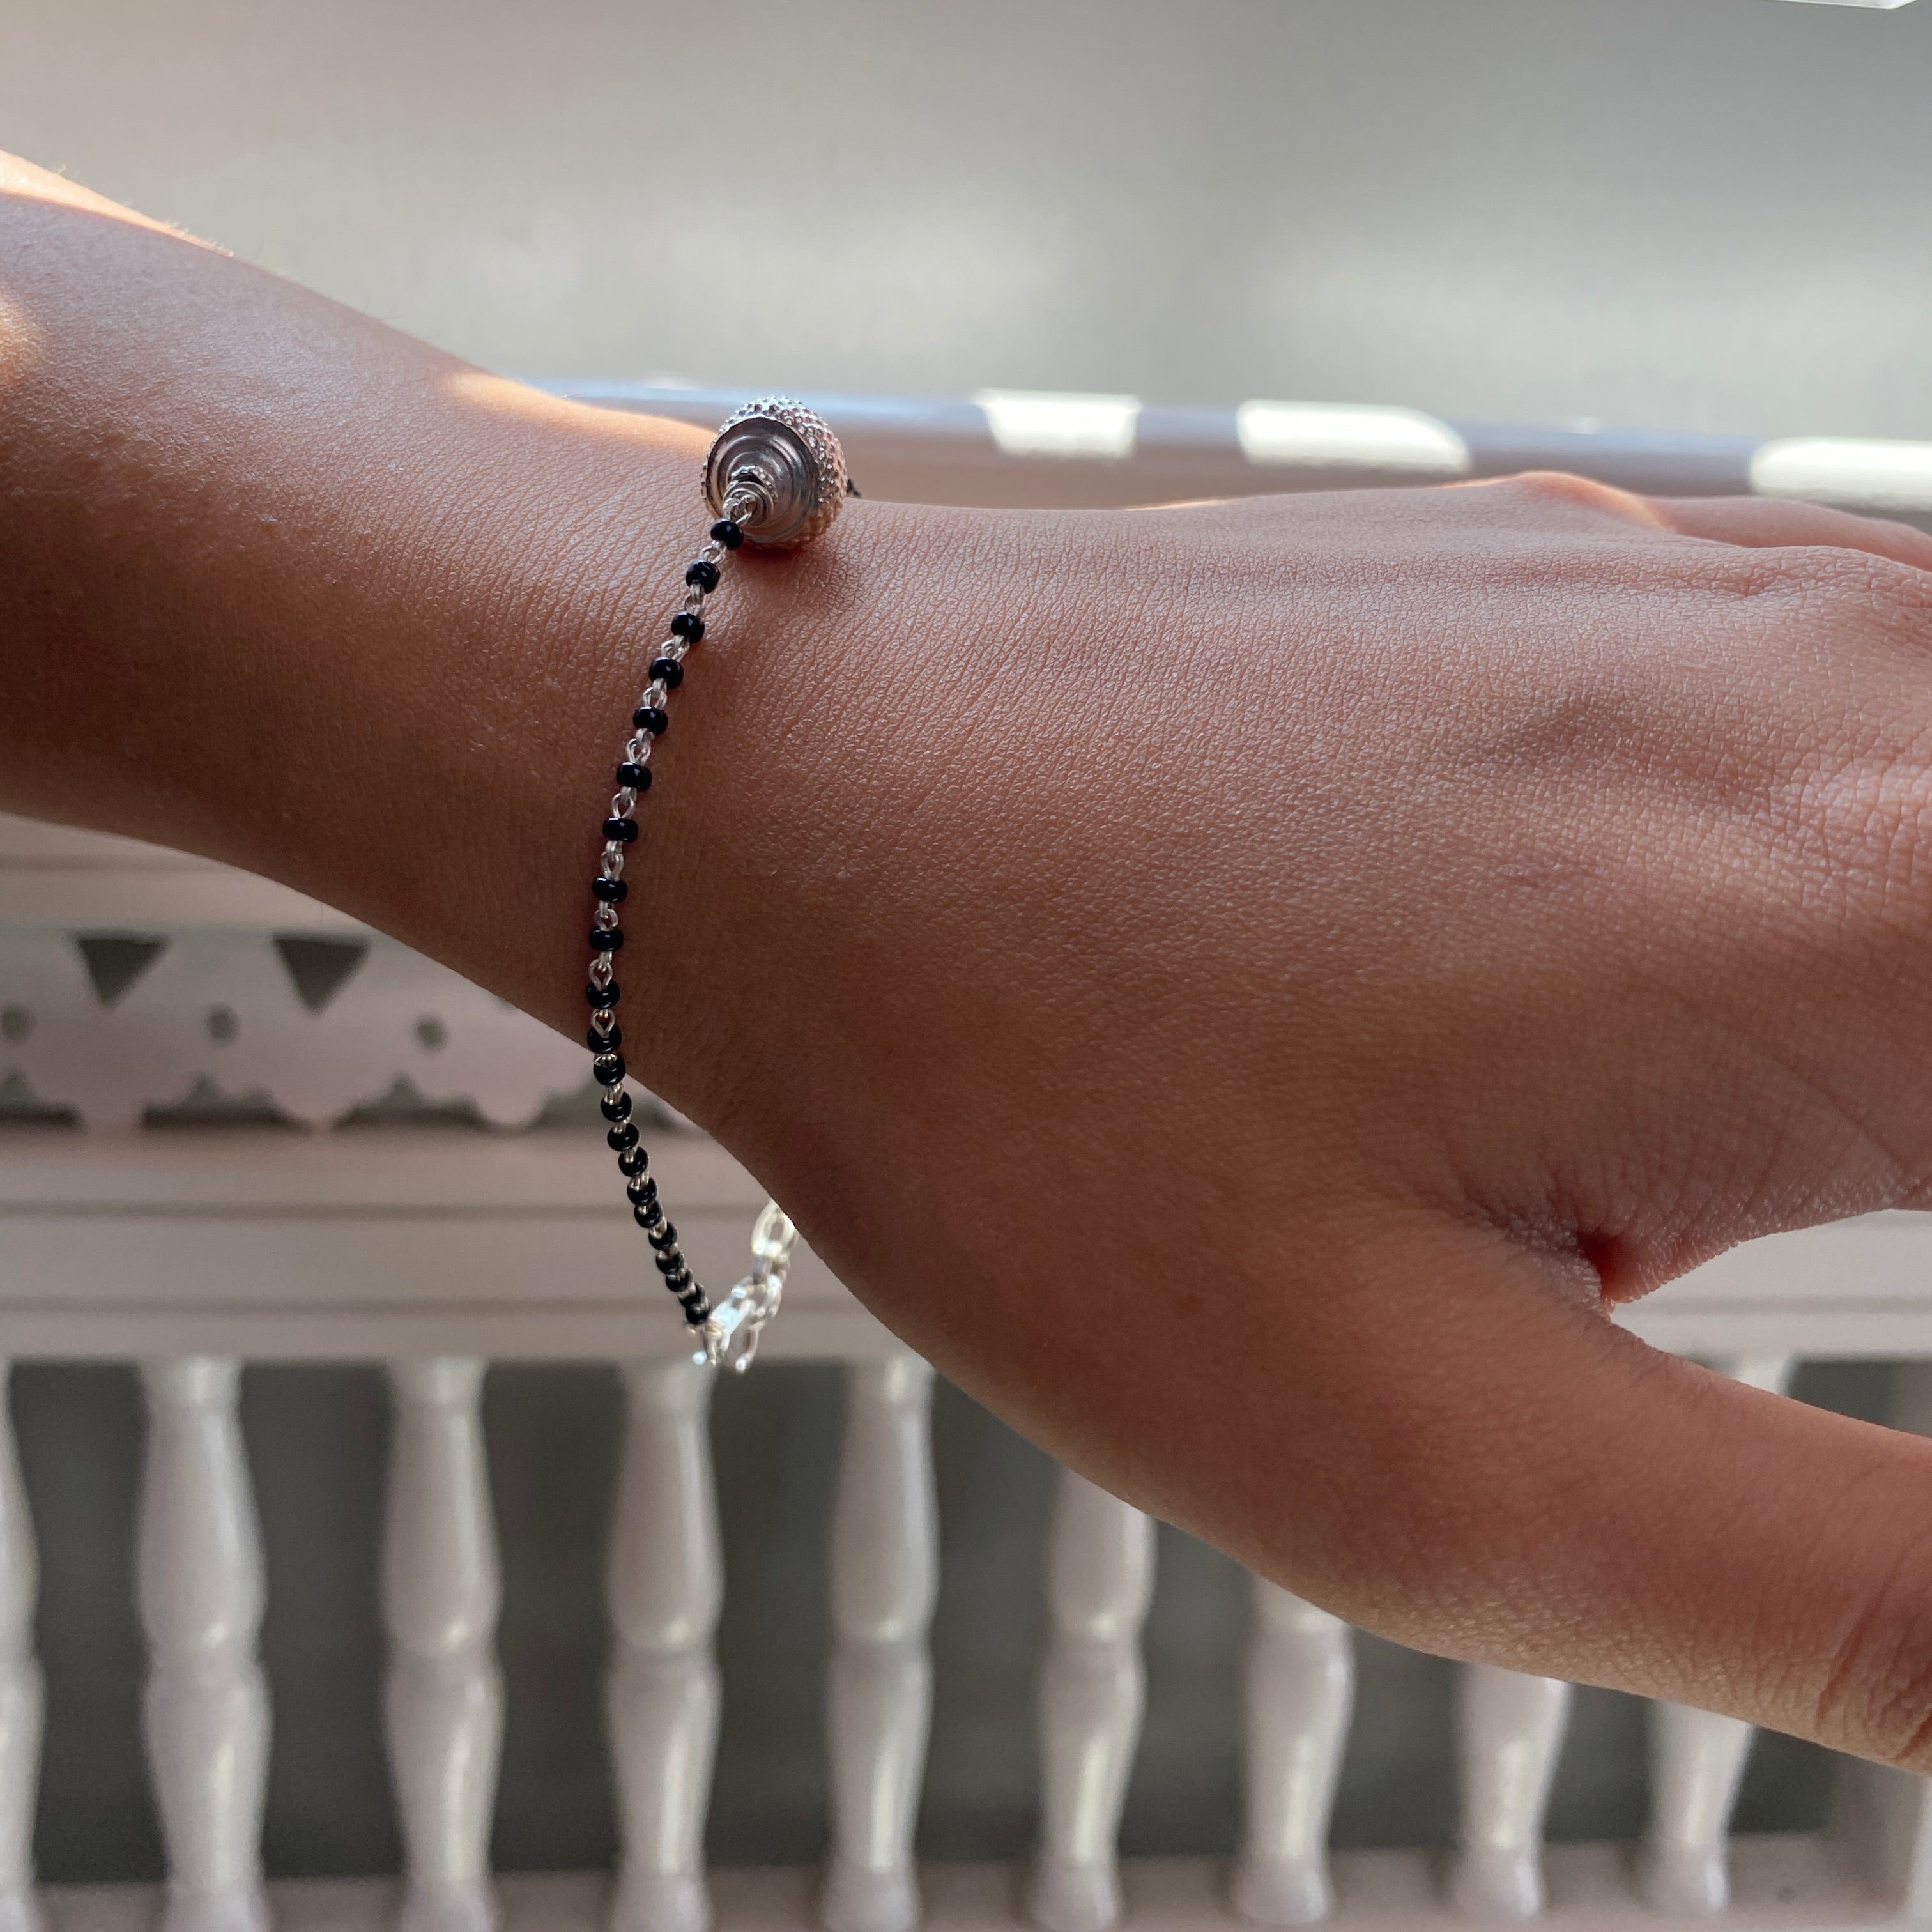 a woman's hand with a beaded bracelet on it